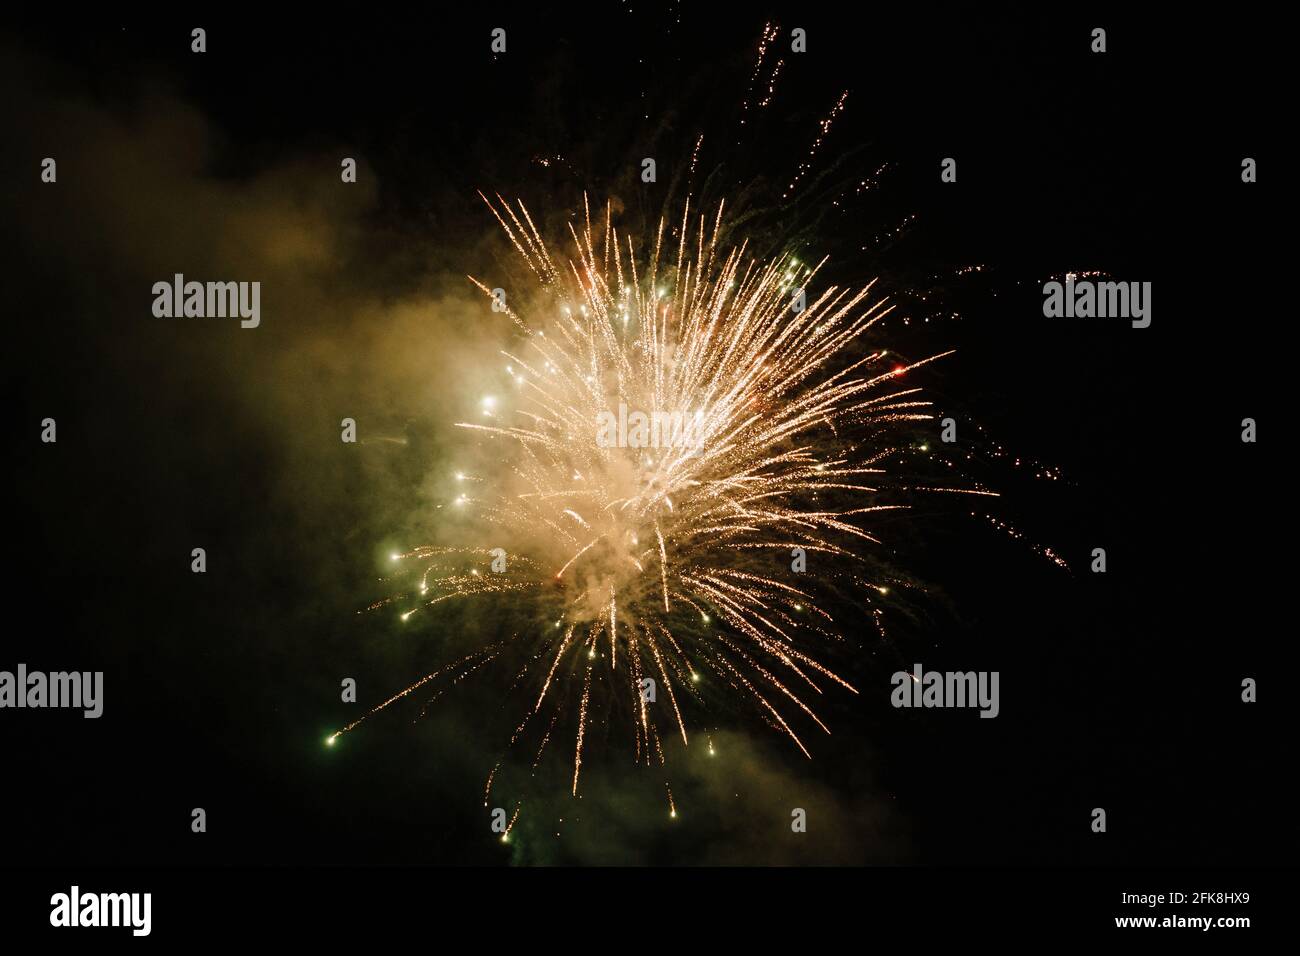 Bright fireworks explode in the night sky Stock Photo